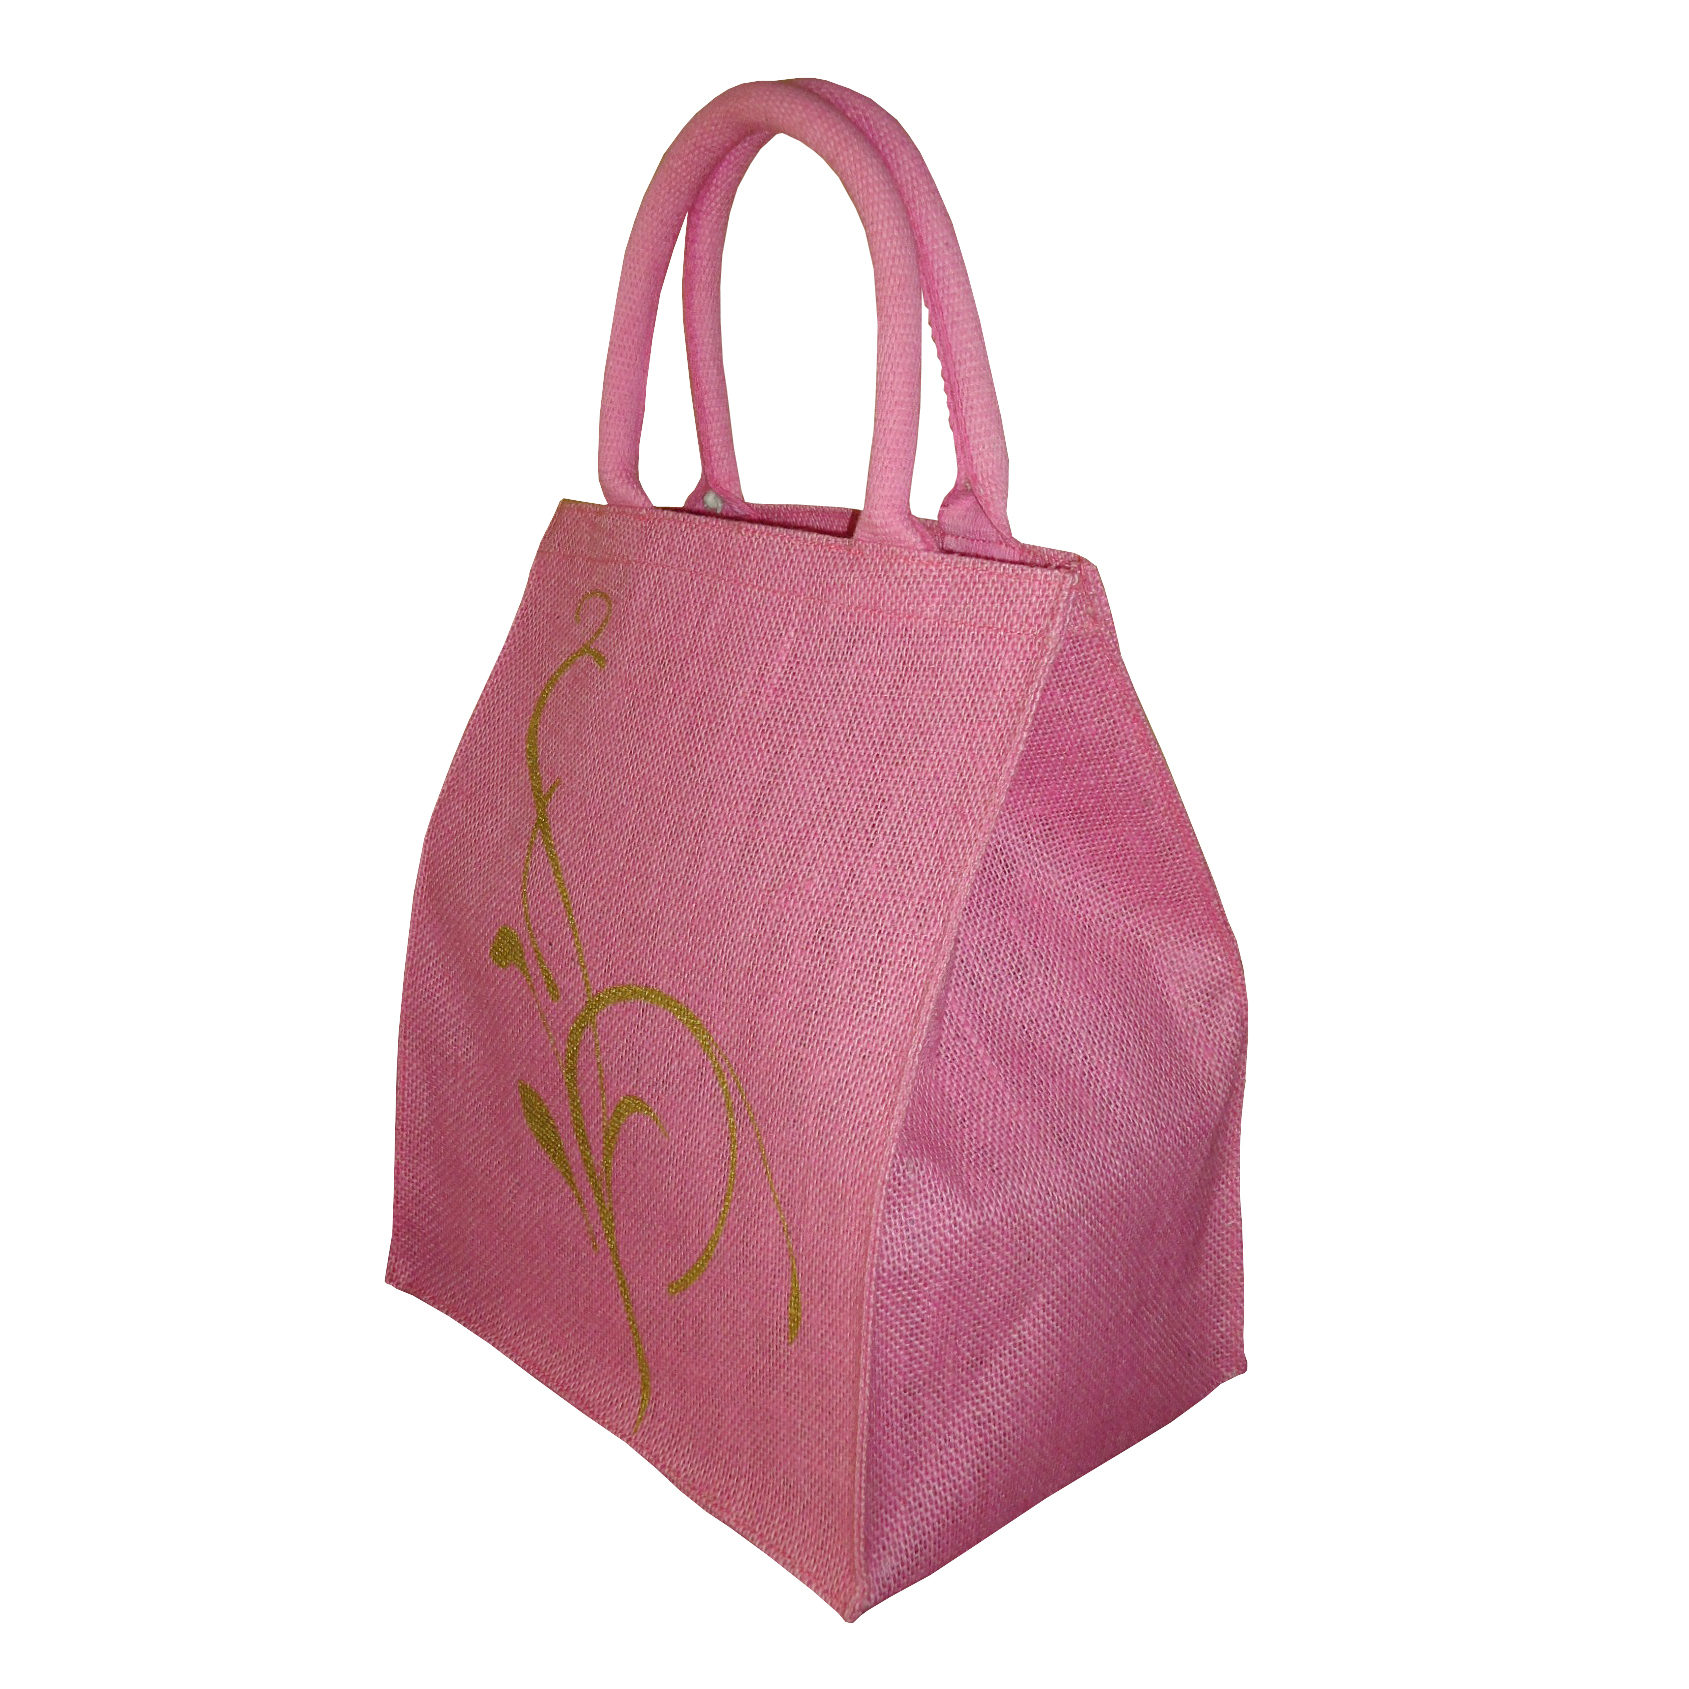 PP Laminated Jute Bag With Metal Press Button On Side Gusset